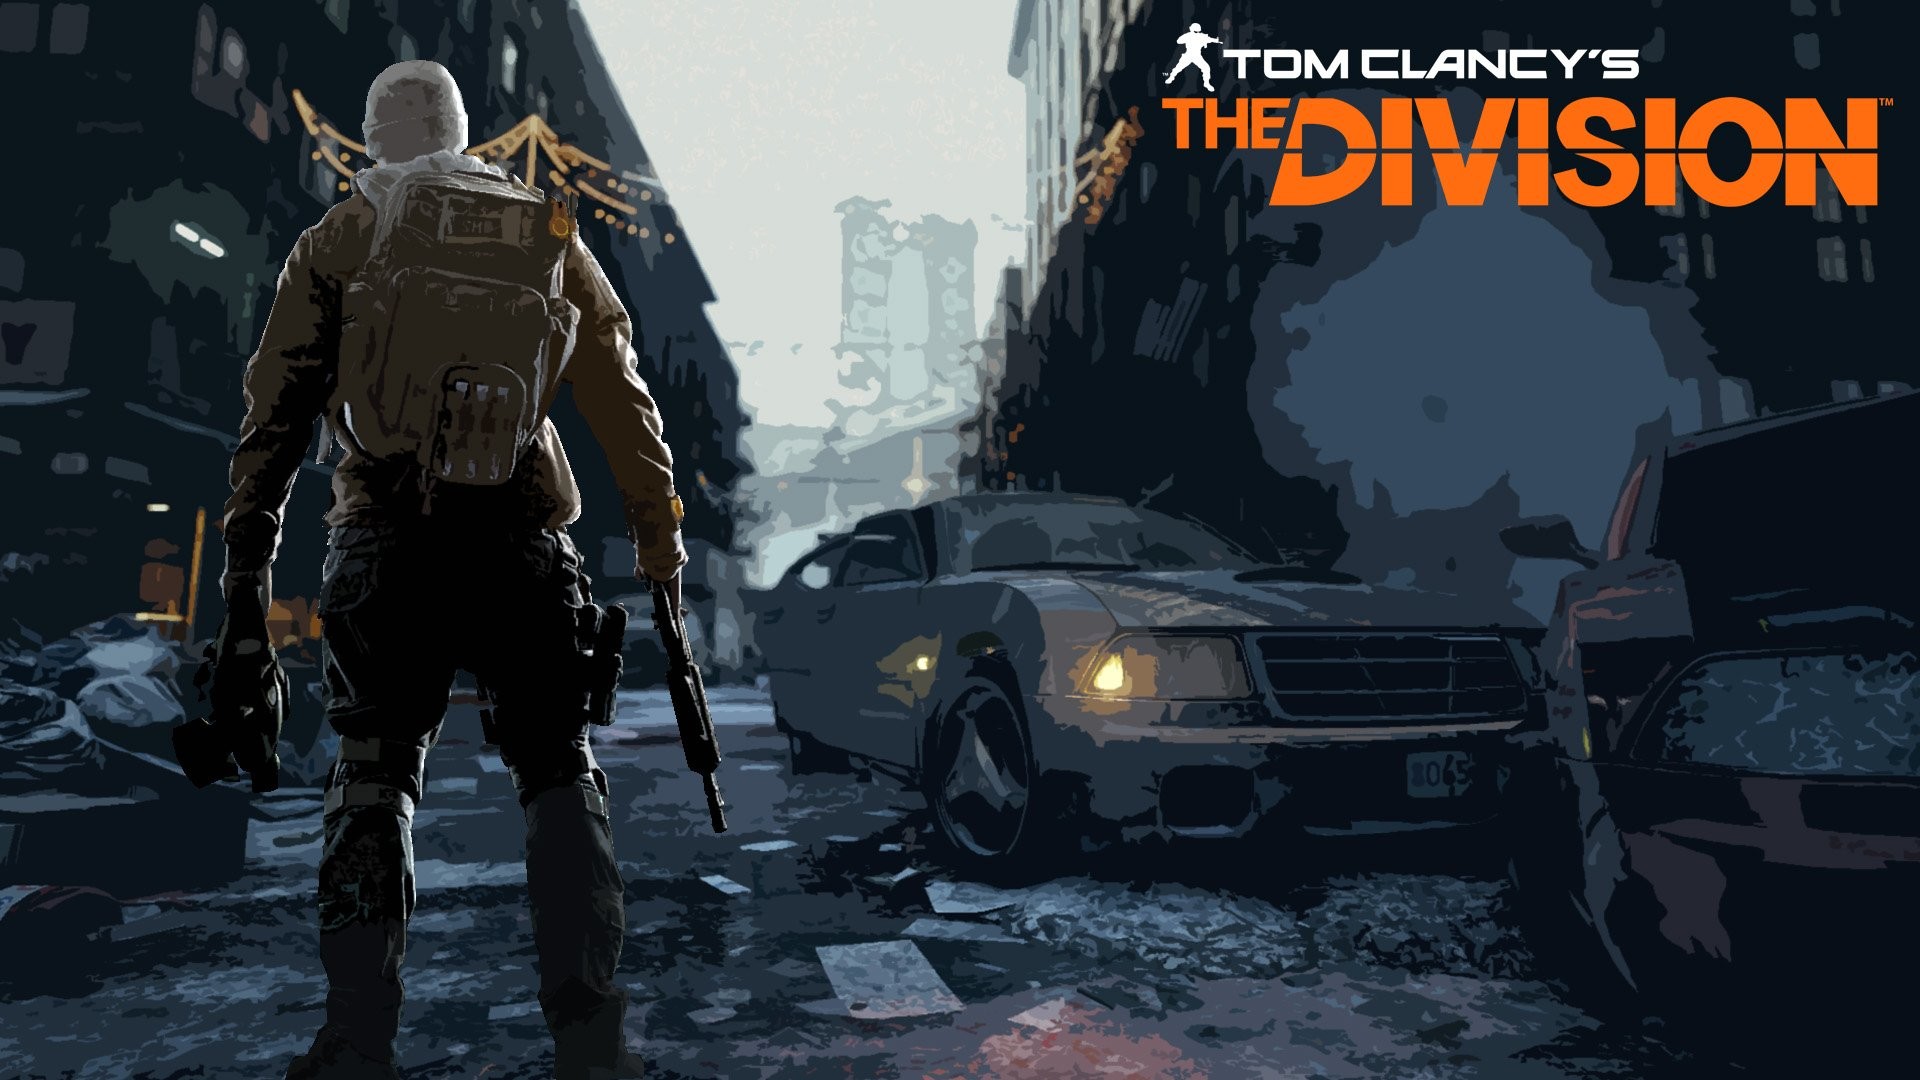 1920x1080 ... tom clancys the division wallpaper awesome images 180qp8d246 ...